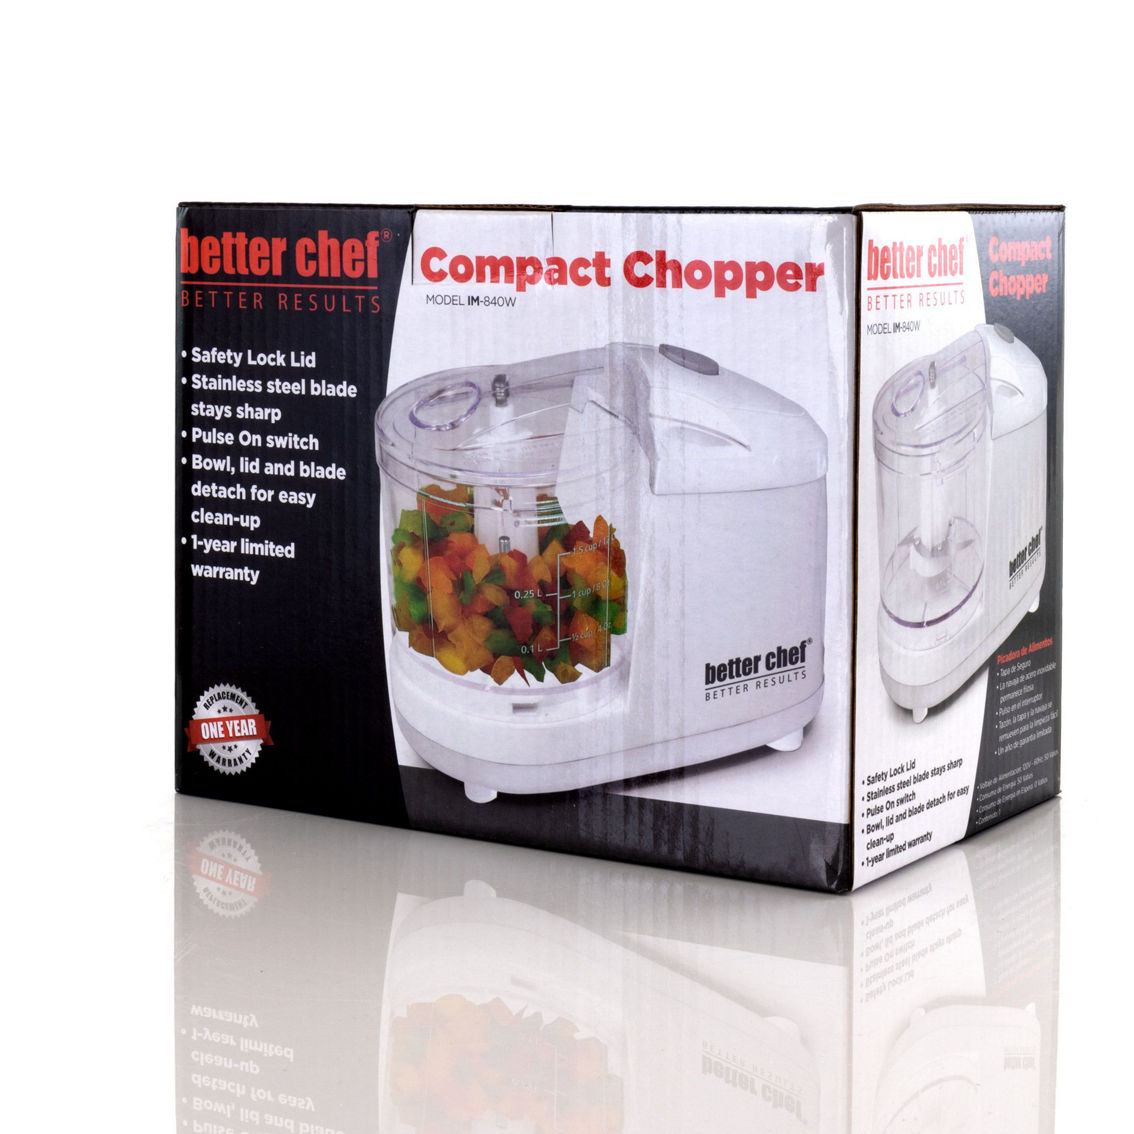 Better Chef 12 Ounce Compact Chopper in White - Image 3 of 5